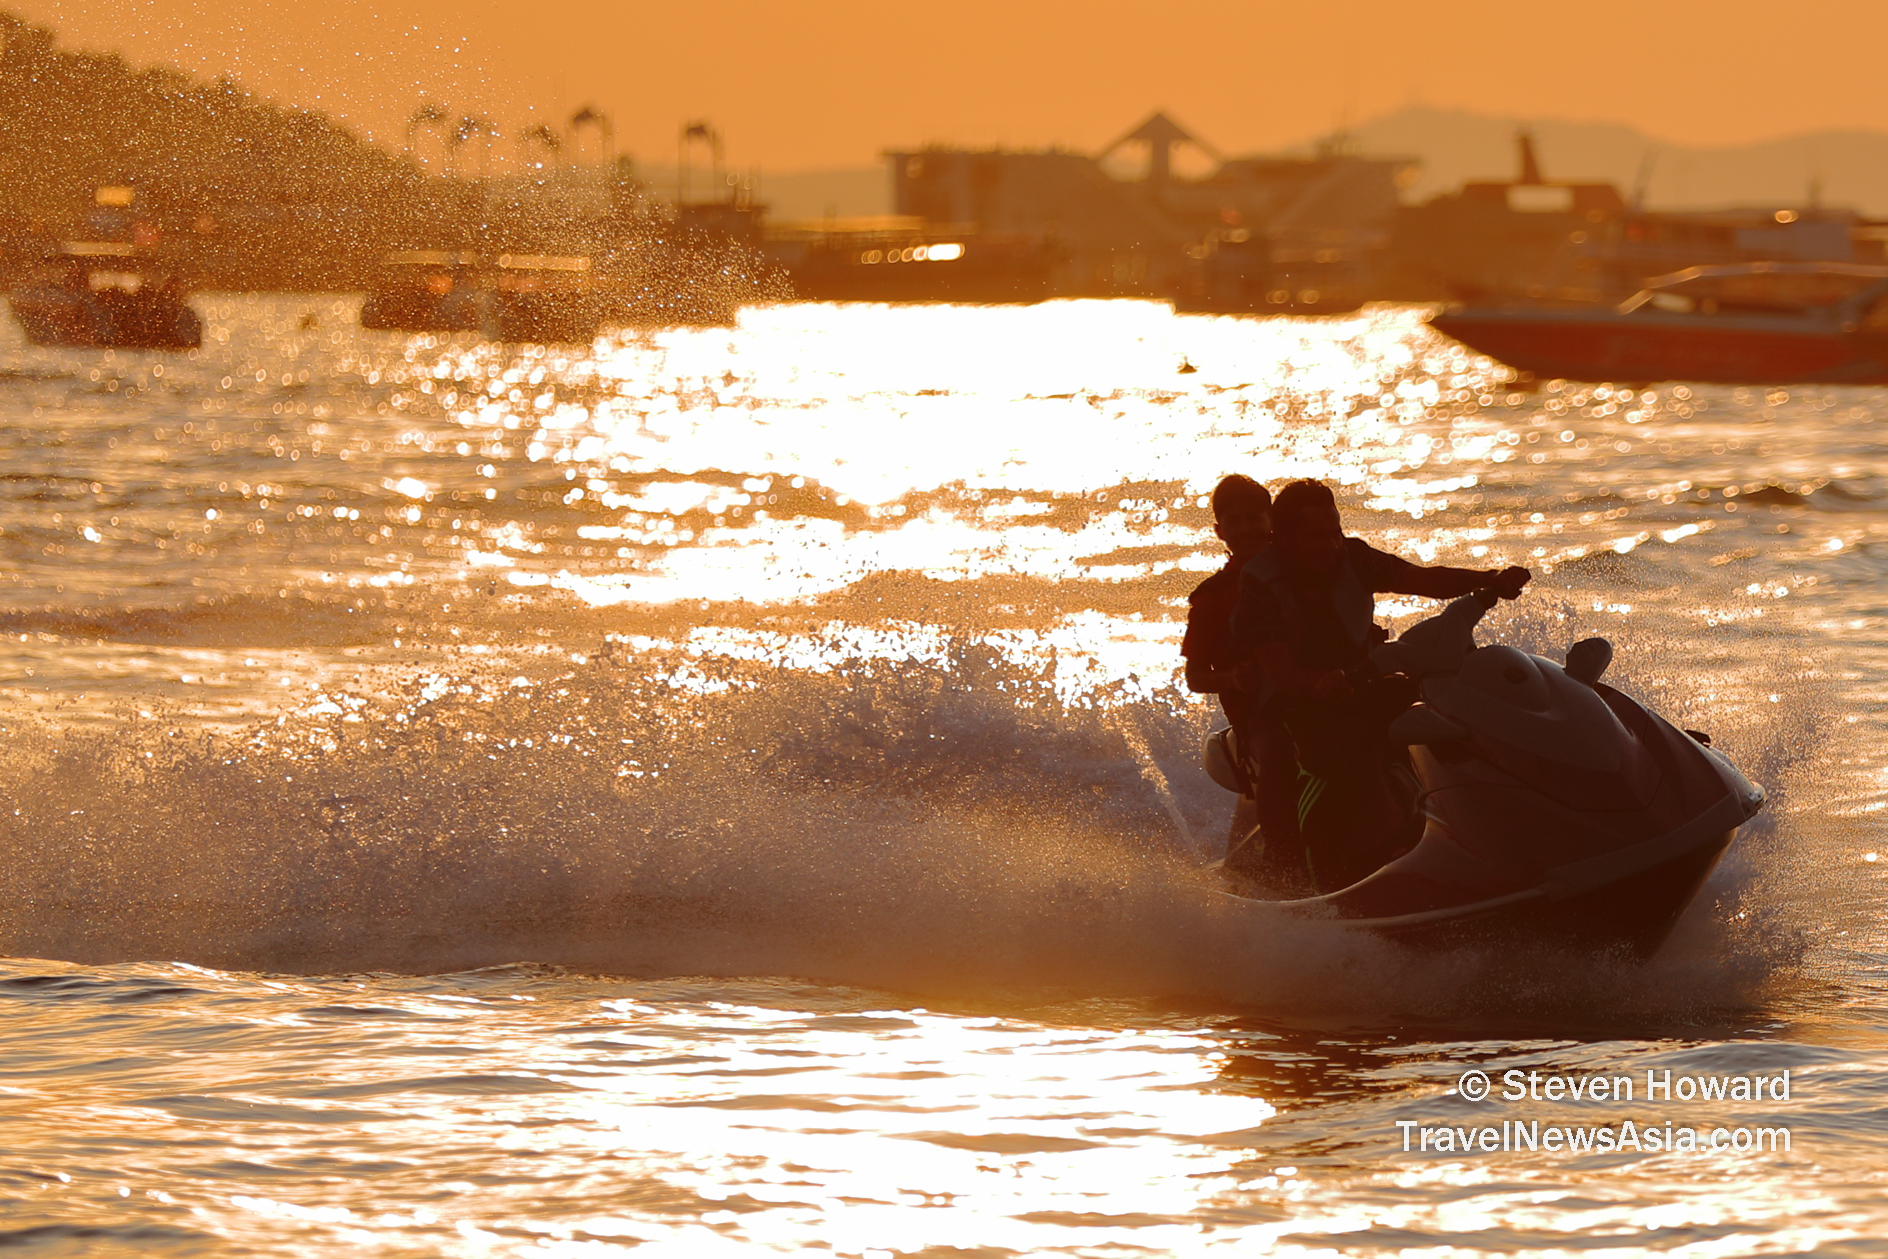 Jetski fun in Pattaya, Thailand. Picture by Steven Howard of TravelNewsAsia.com Click to enlarge.